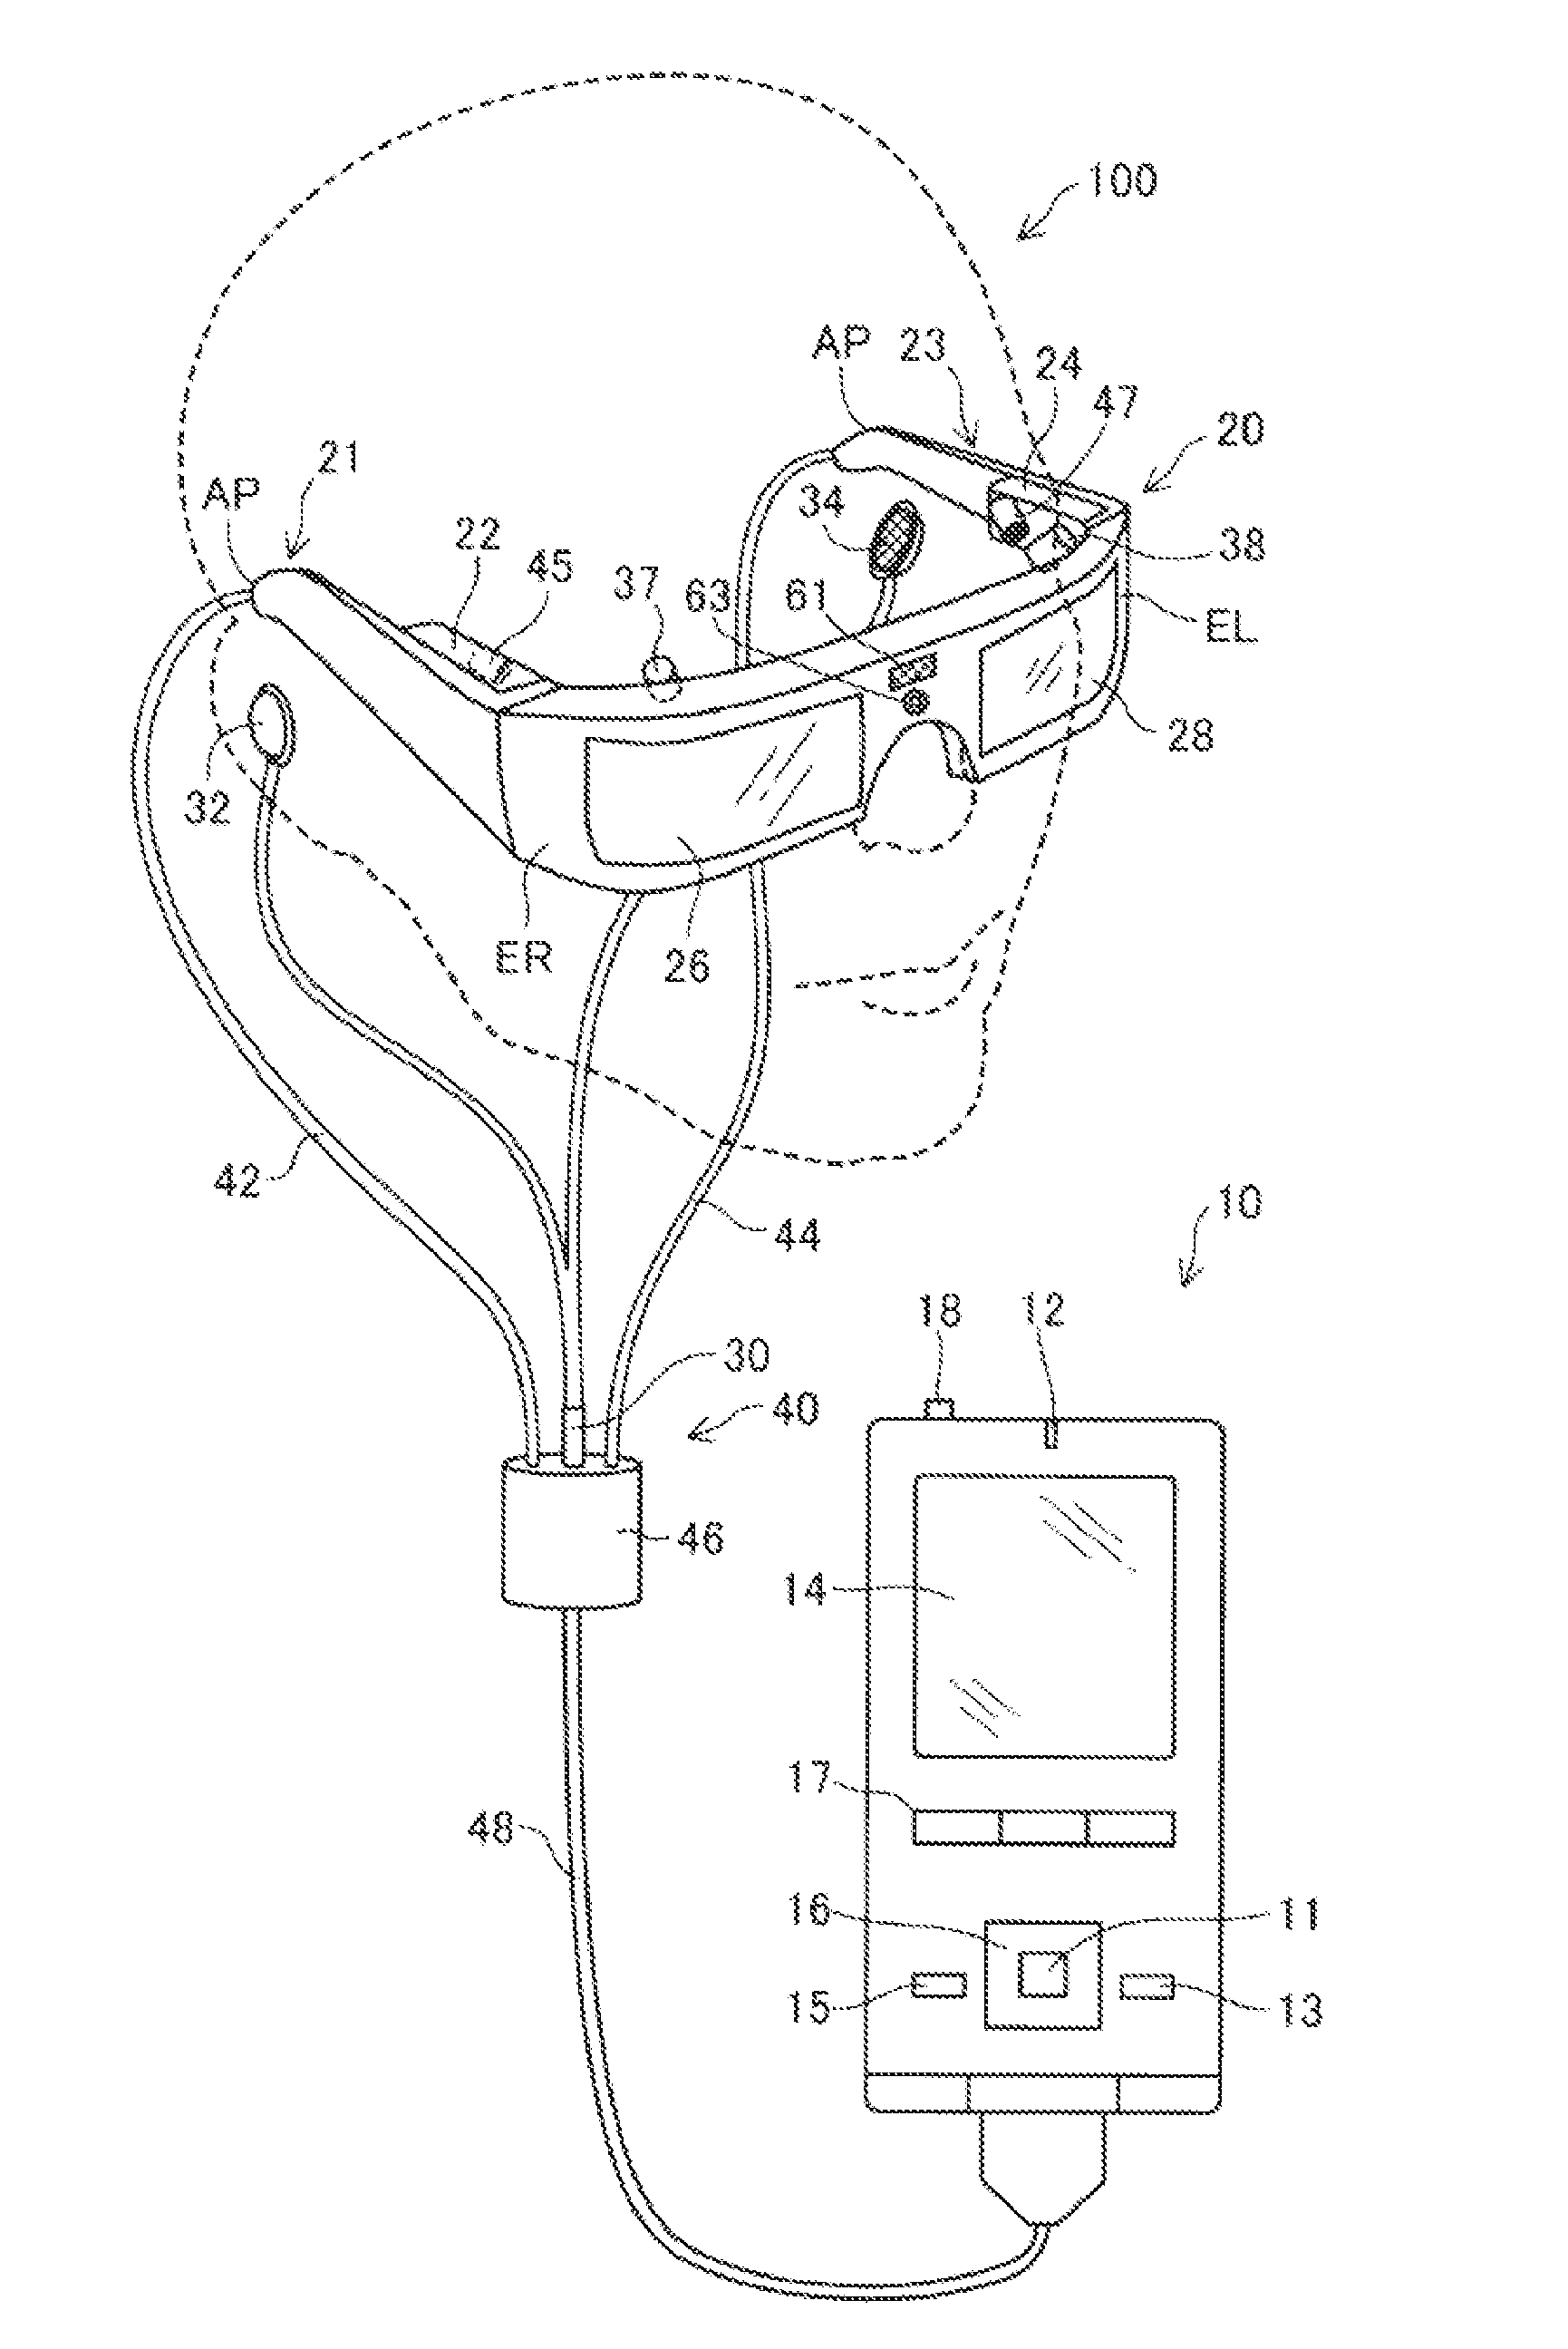 Head-mounted display device and method of controlling head-mounted display device